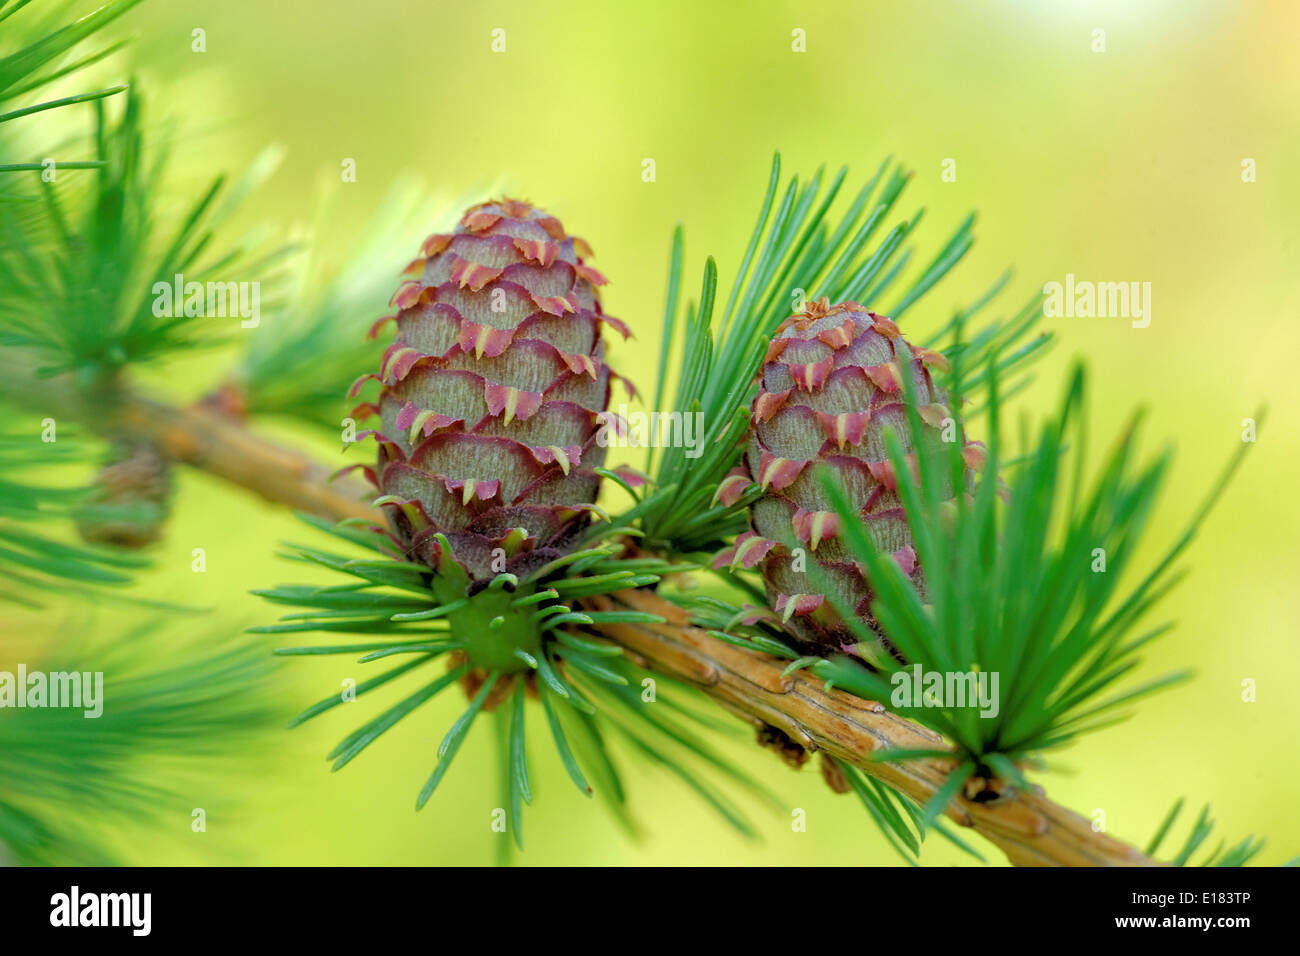 Ovulate cones (strobiles) of larch tree, spring, May Stock Photo